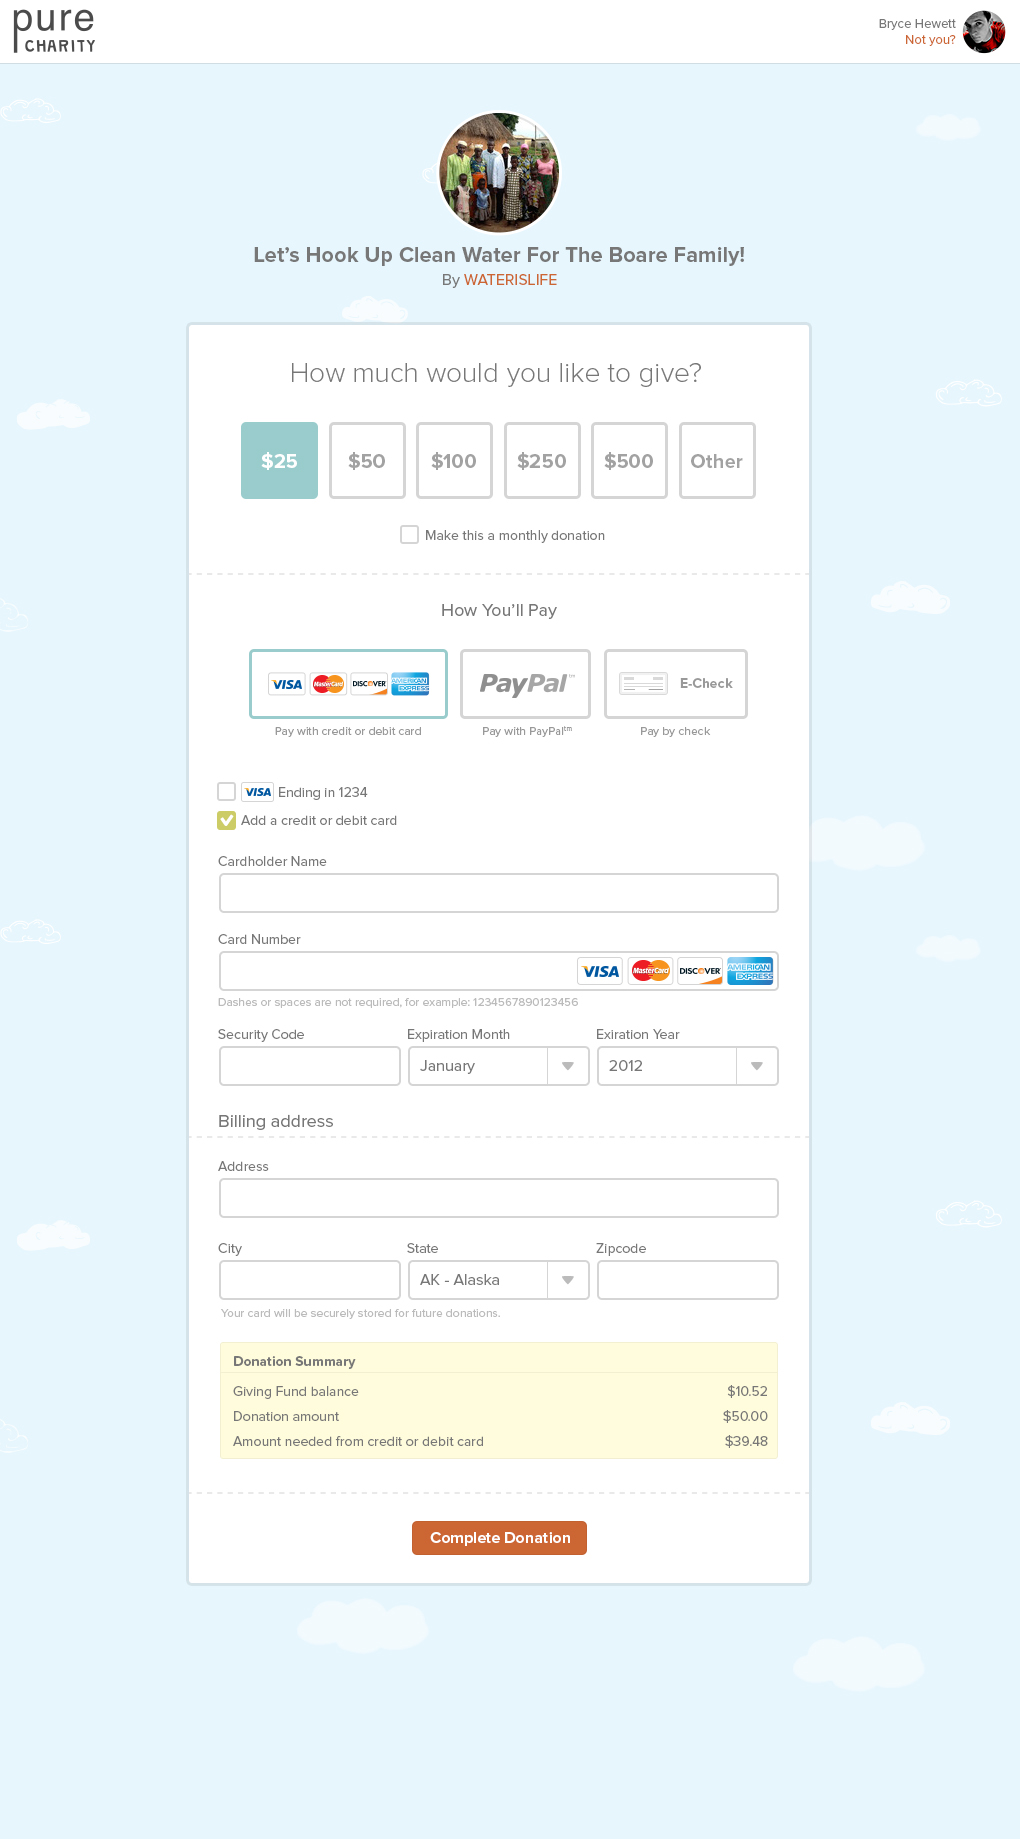 Funding Flow Payment options by Bryce Hewett on Dribbble